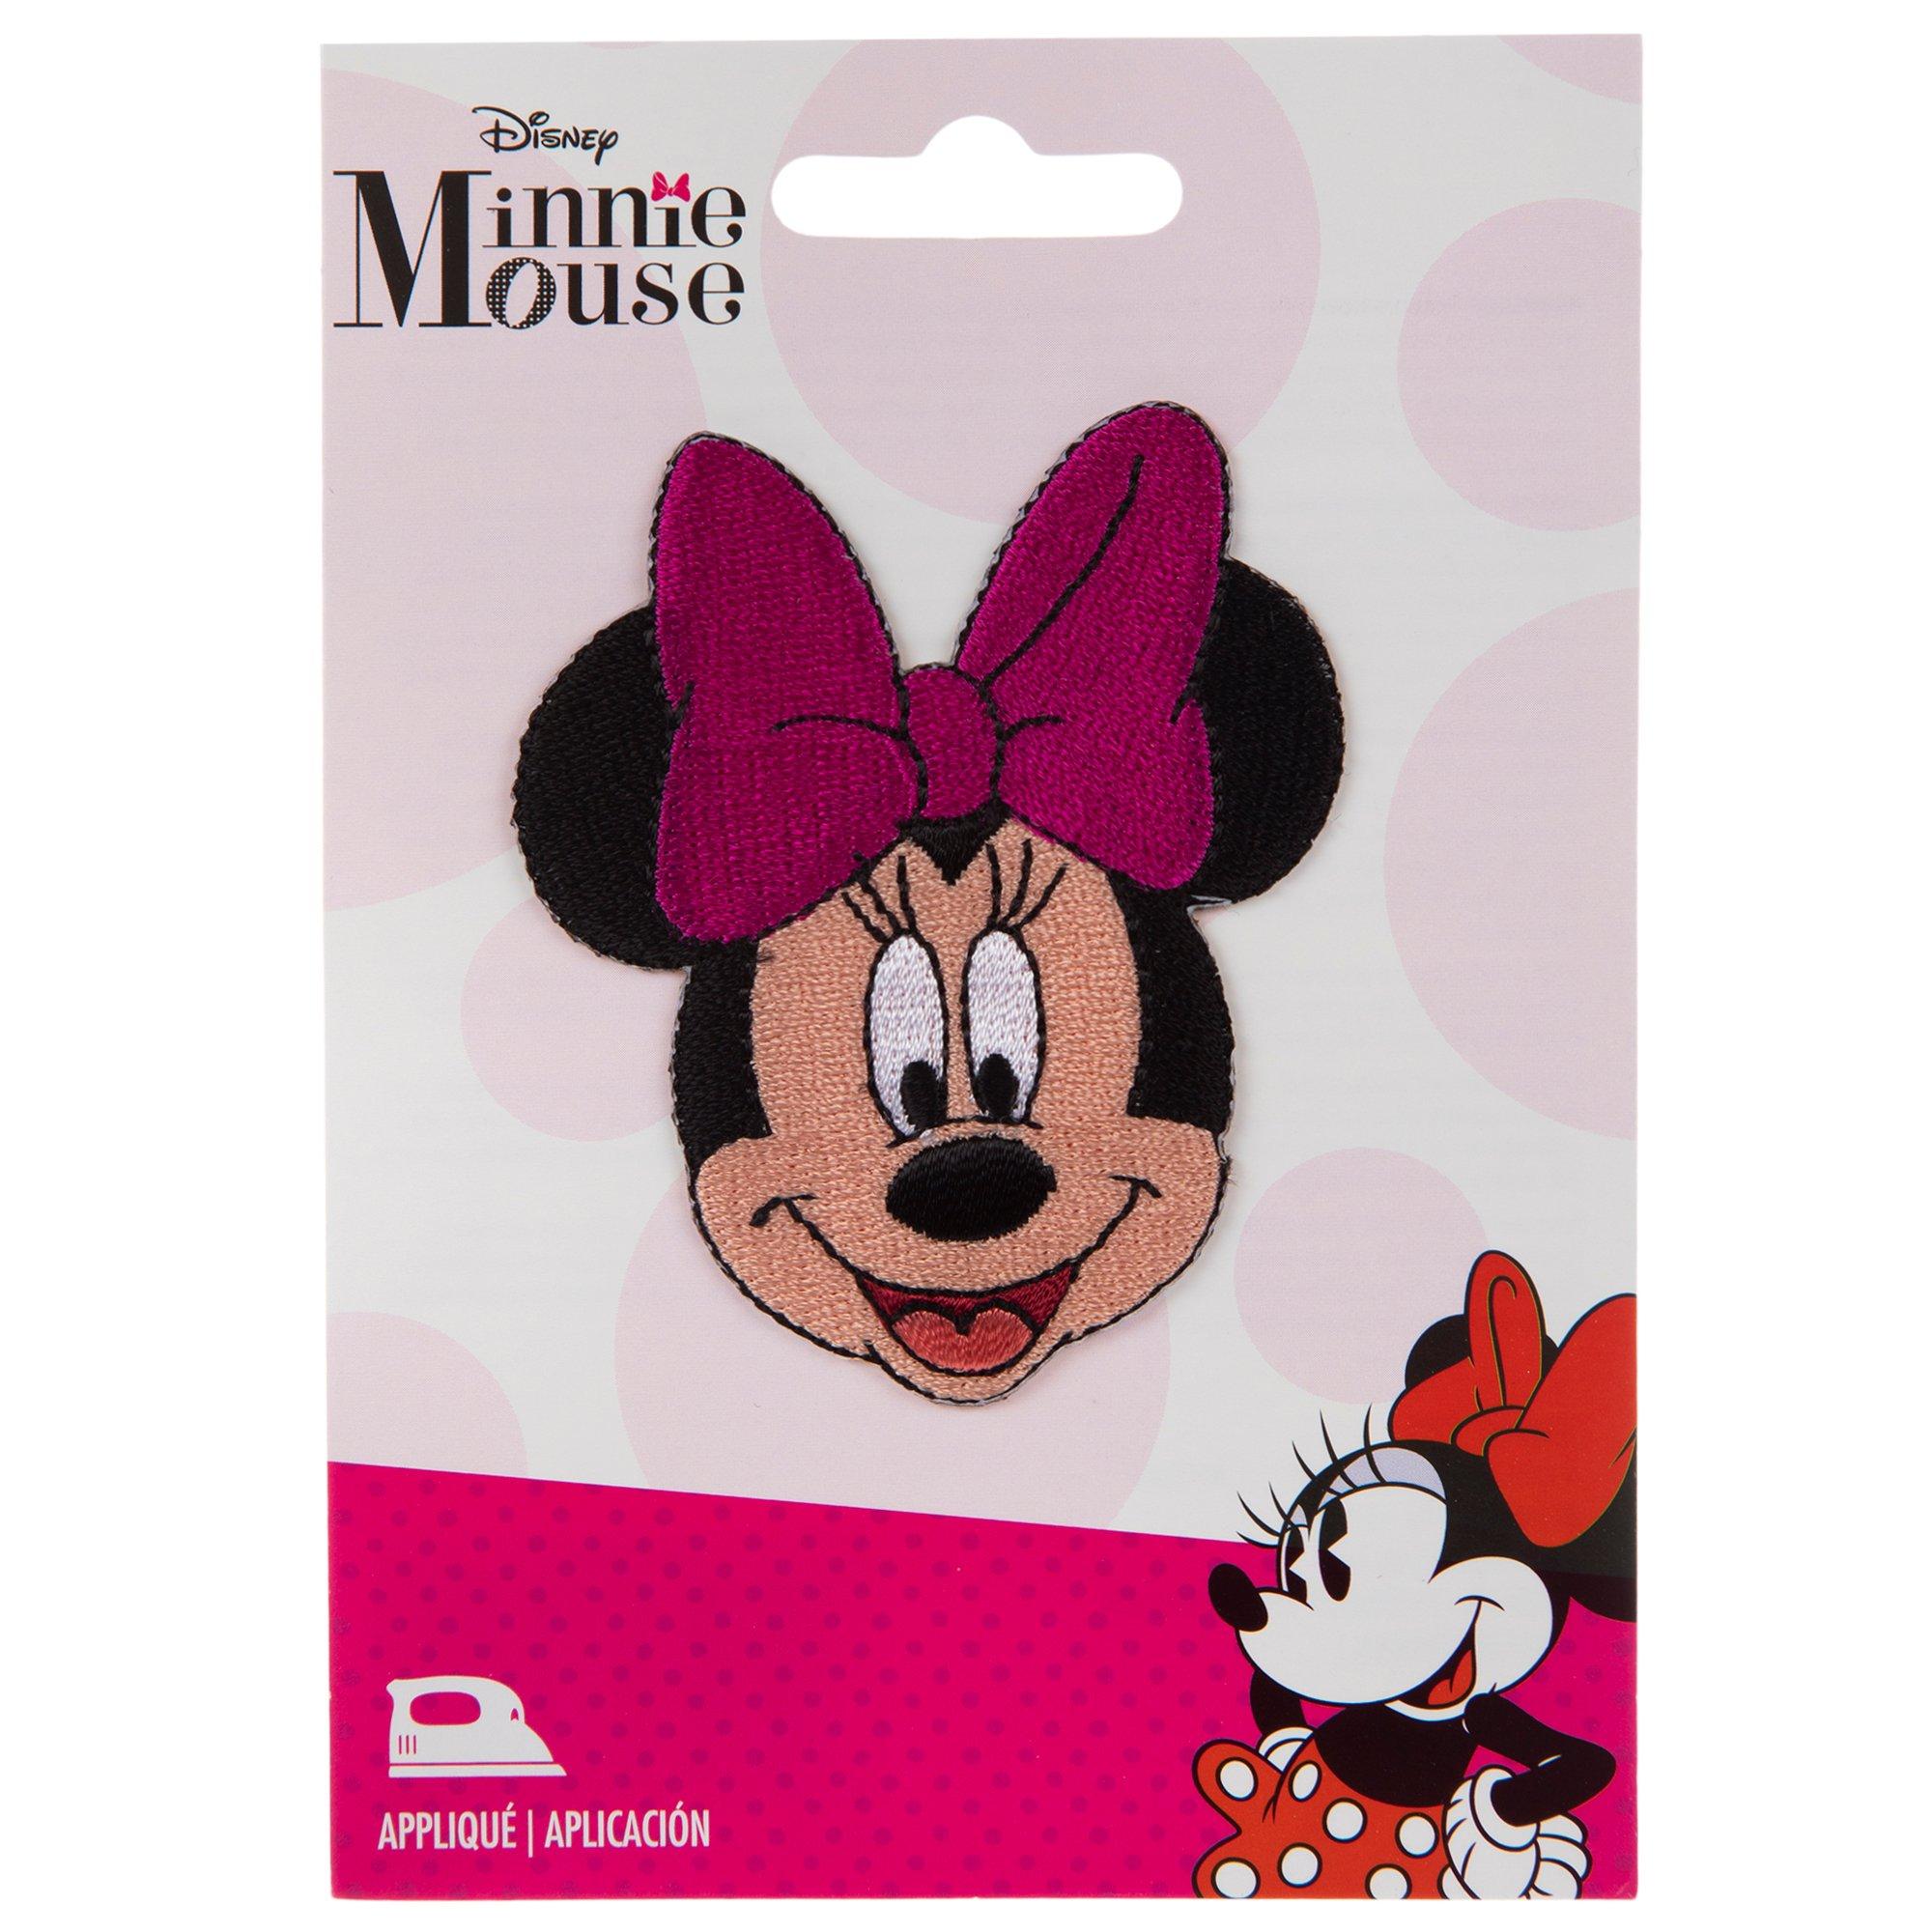 Minnie Mouse Iron-On Patches, Hobby Lobby, 1878594